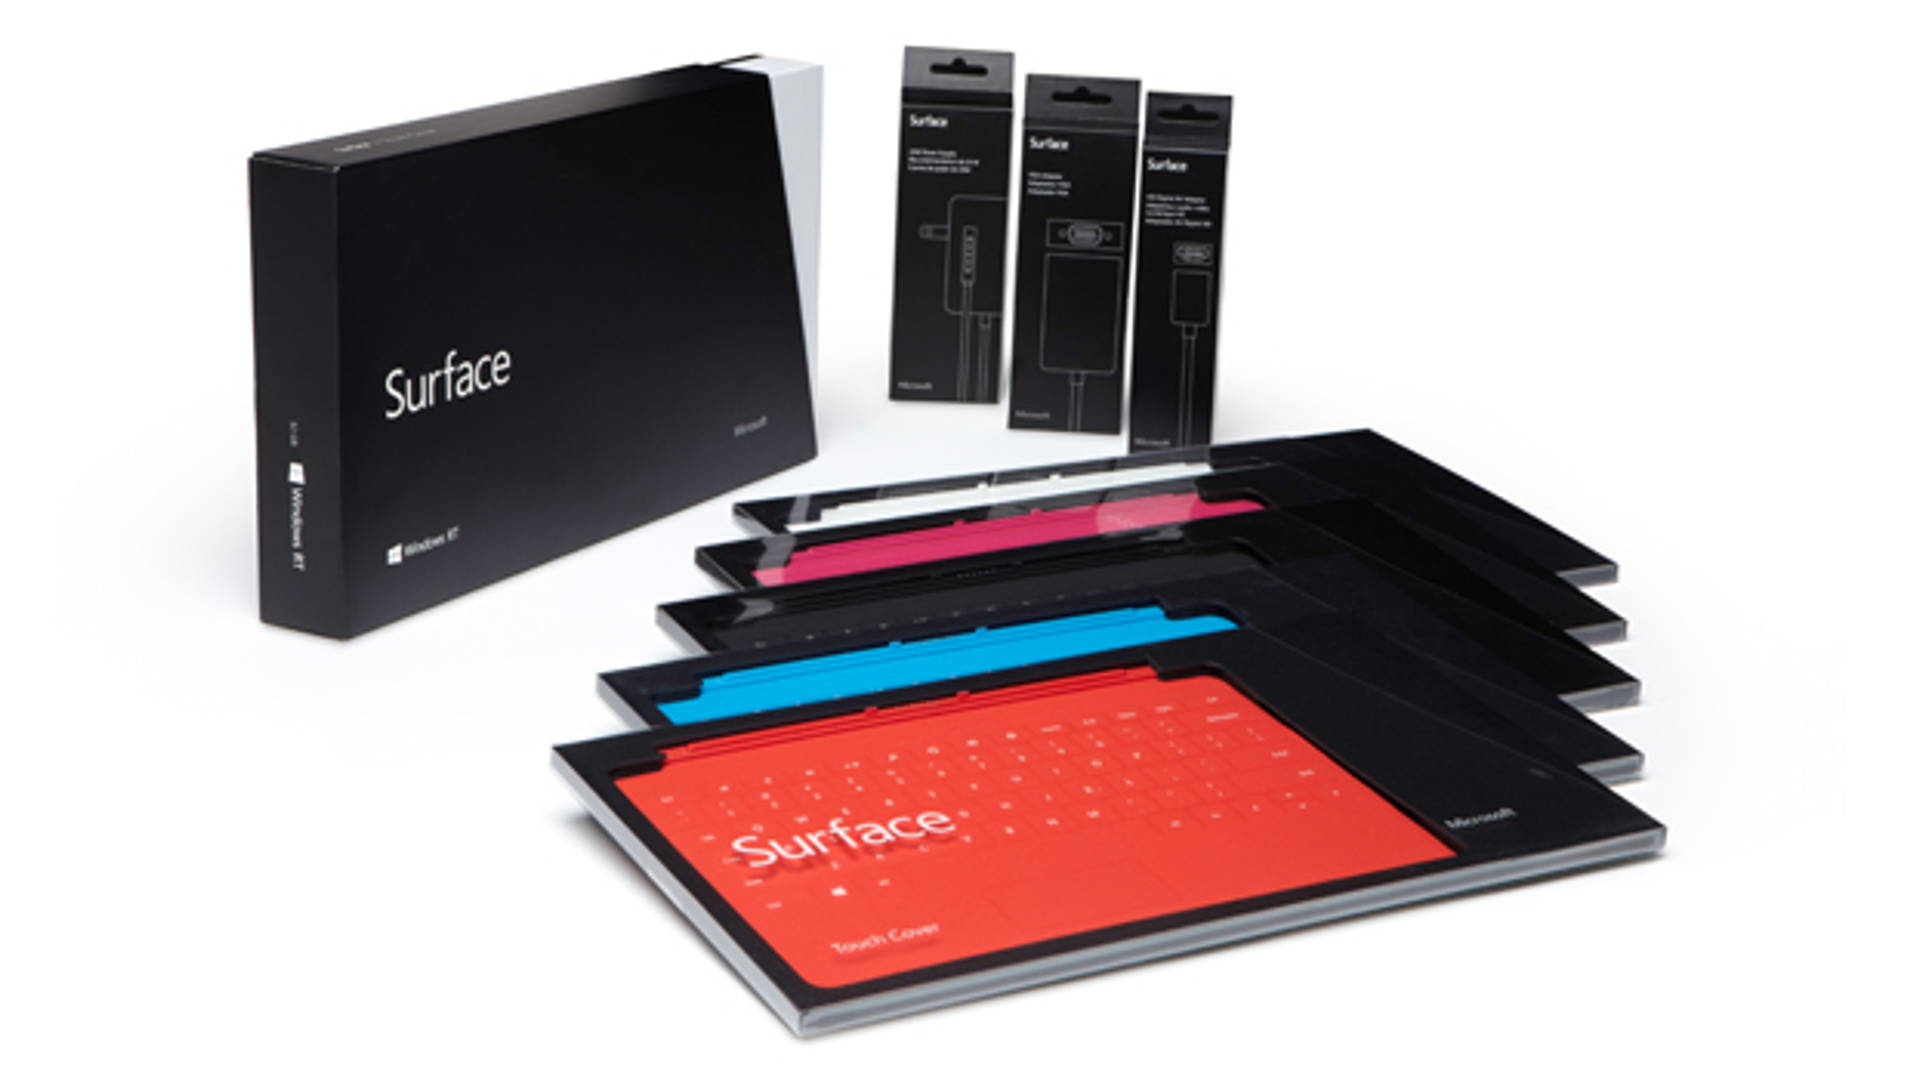 Featured image for Surface Tablet and Accessories Featuring Windows 8 